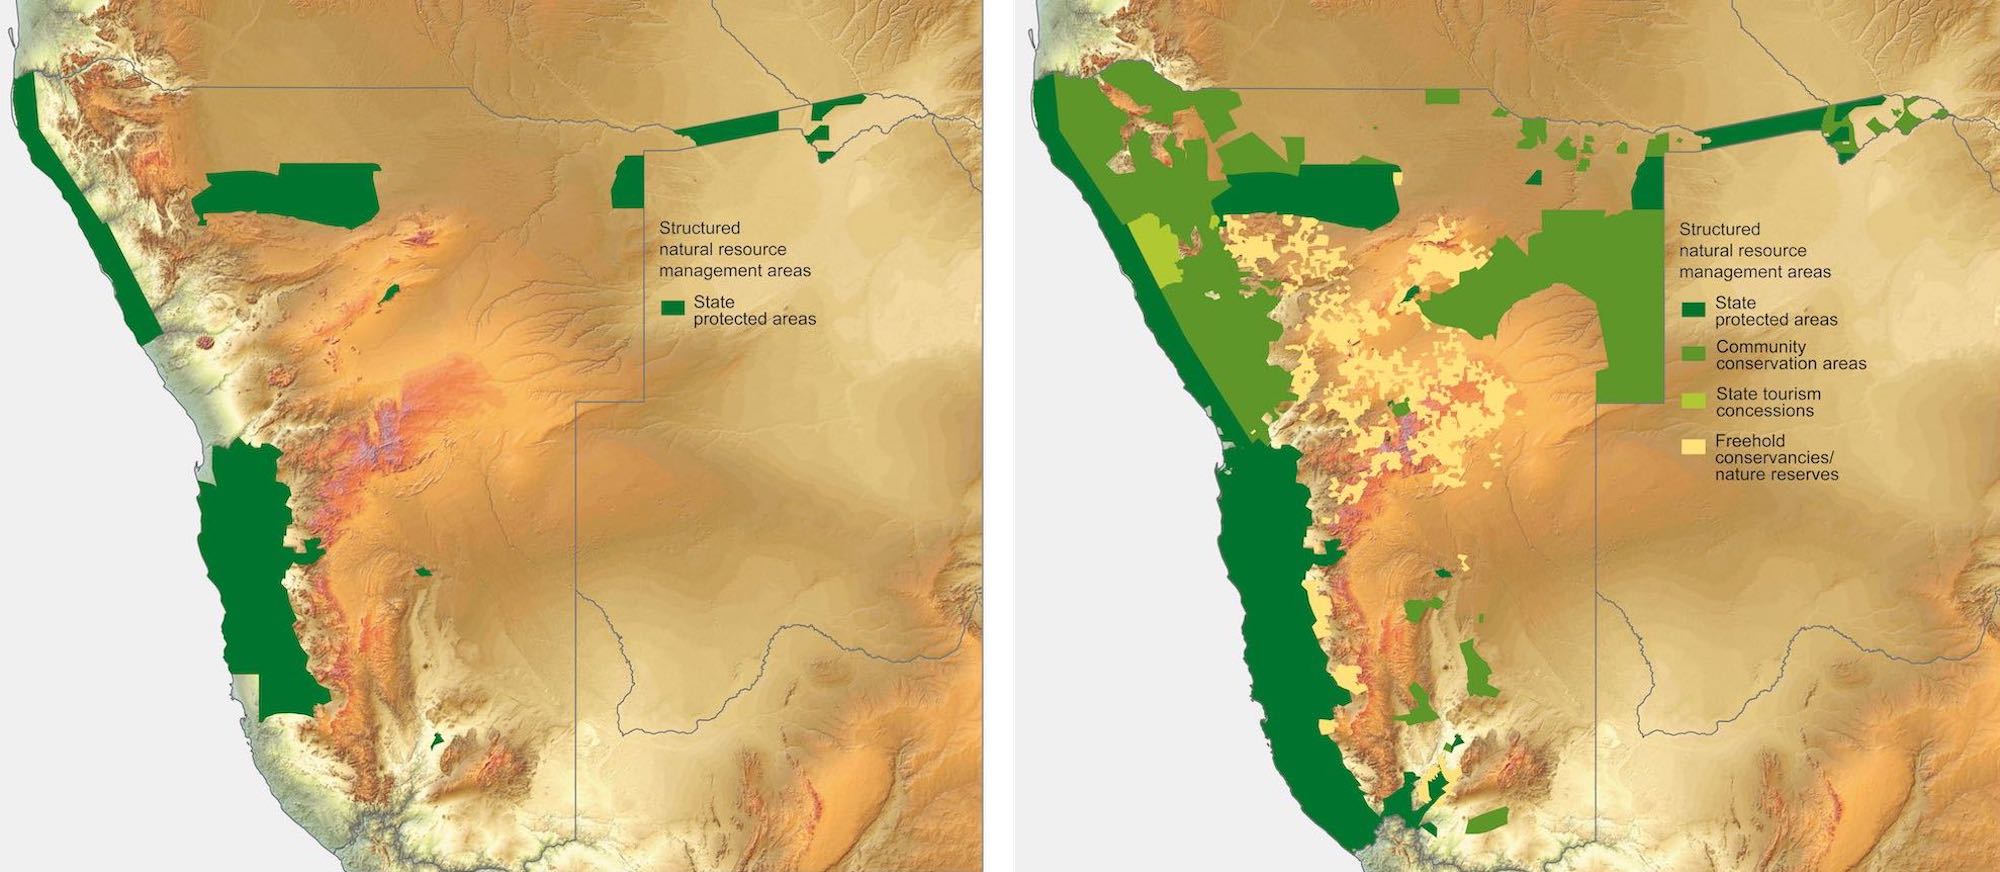 Maps of Communal and Freehold Conservancies and National Parks in Namibia, showing significant growth in protected areas between 1990 and 2017.